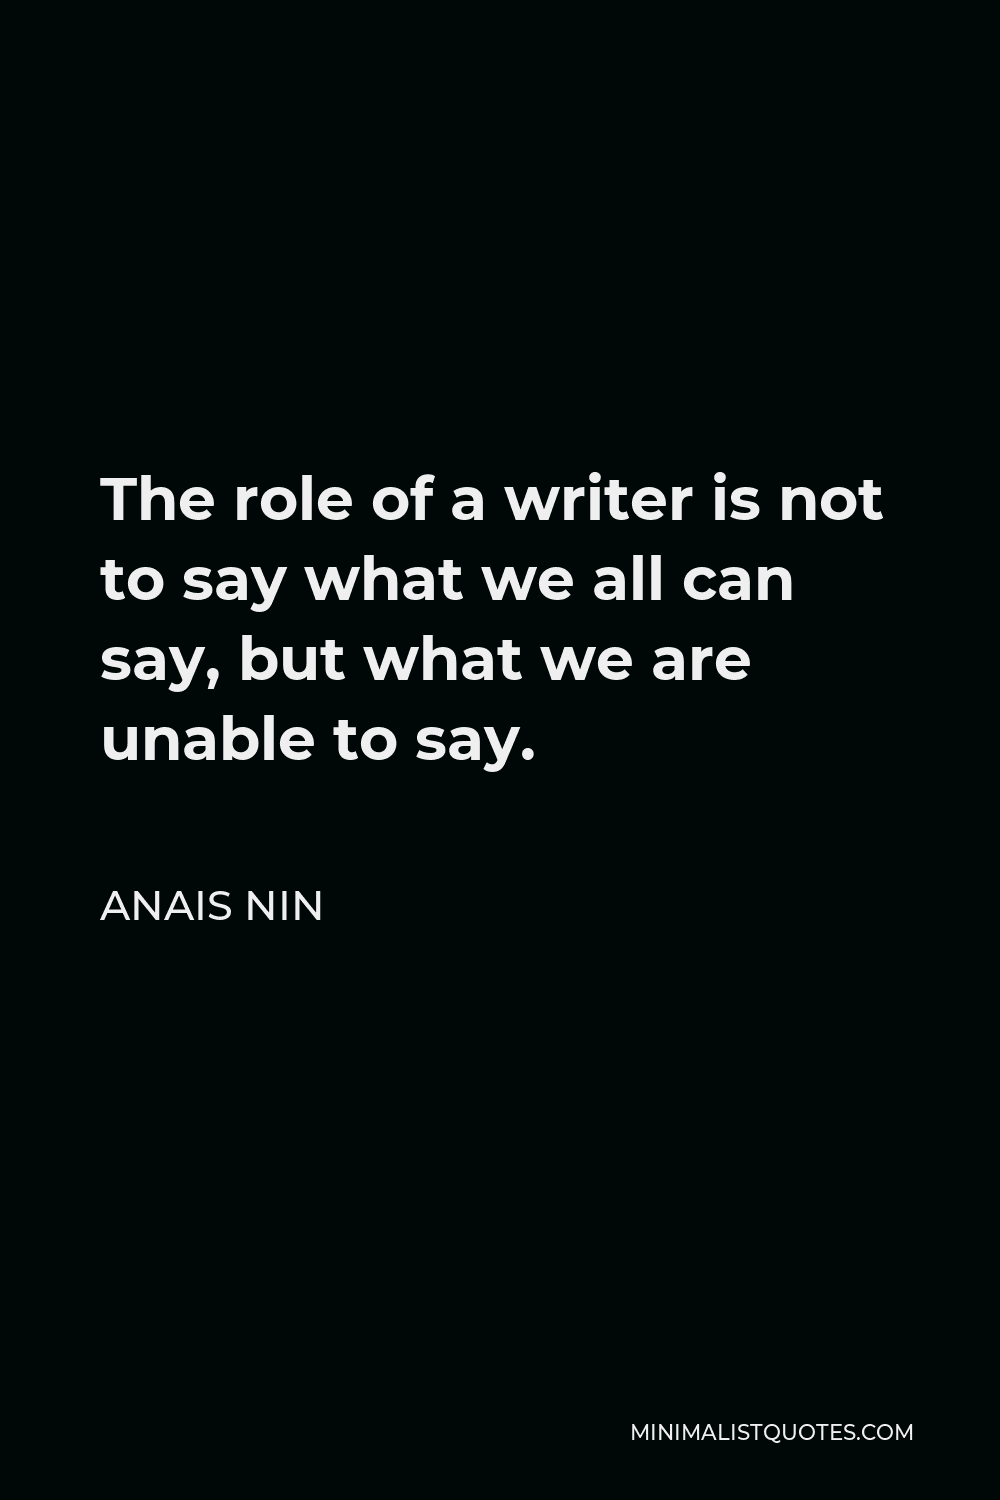 Anais Nin Quote - The role of a writer is not to say what we all can say, but what we are unable to say.